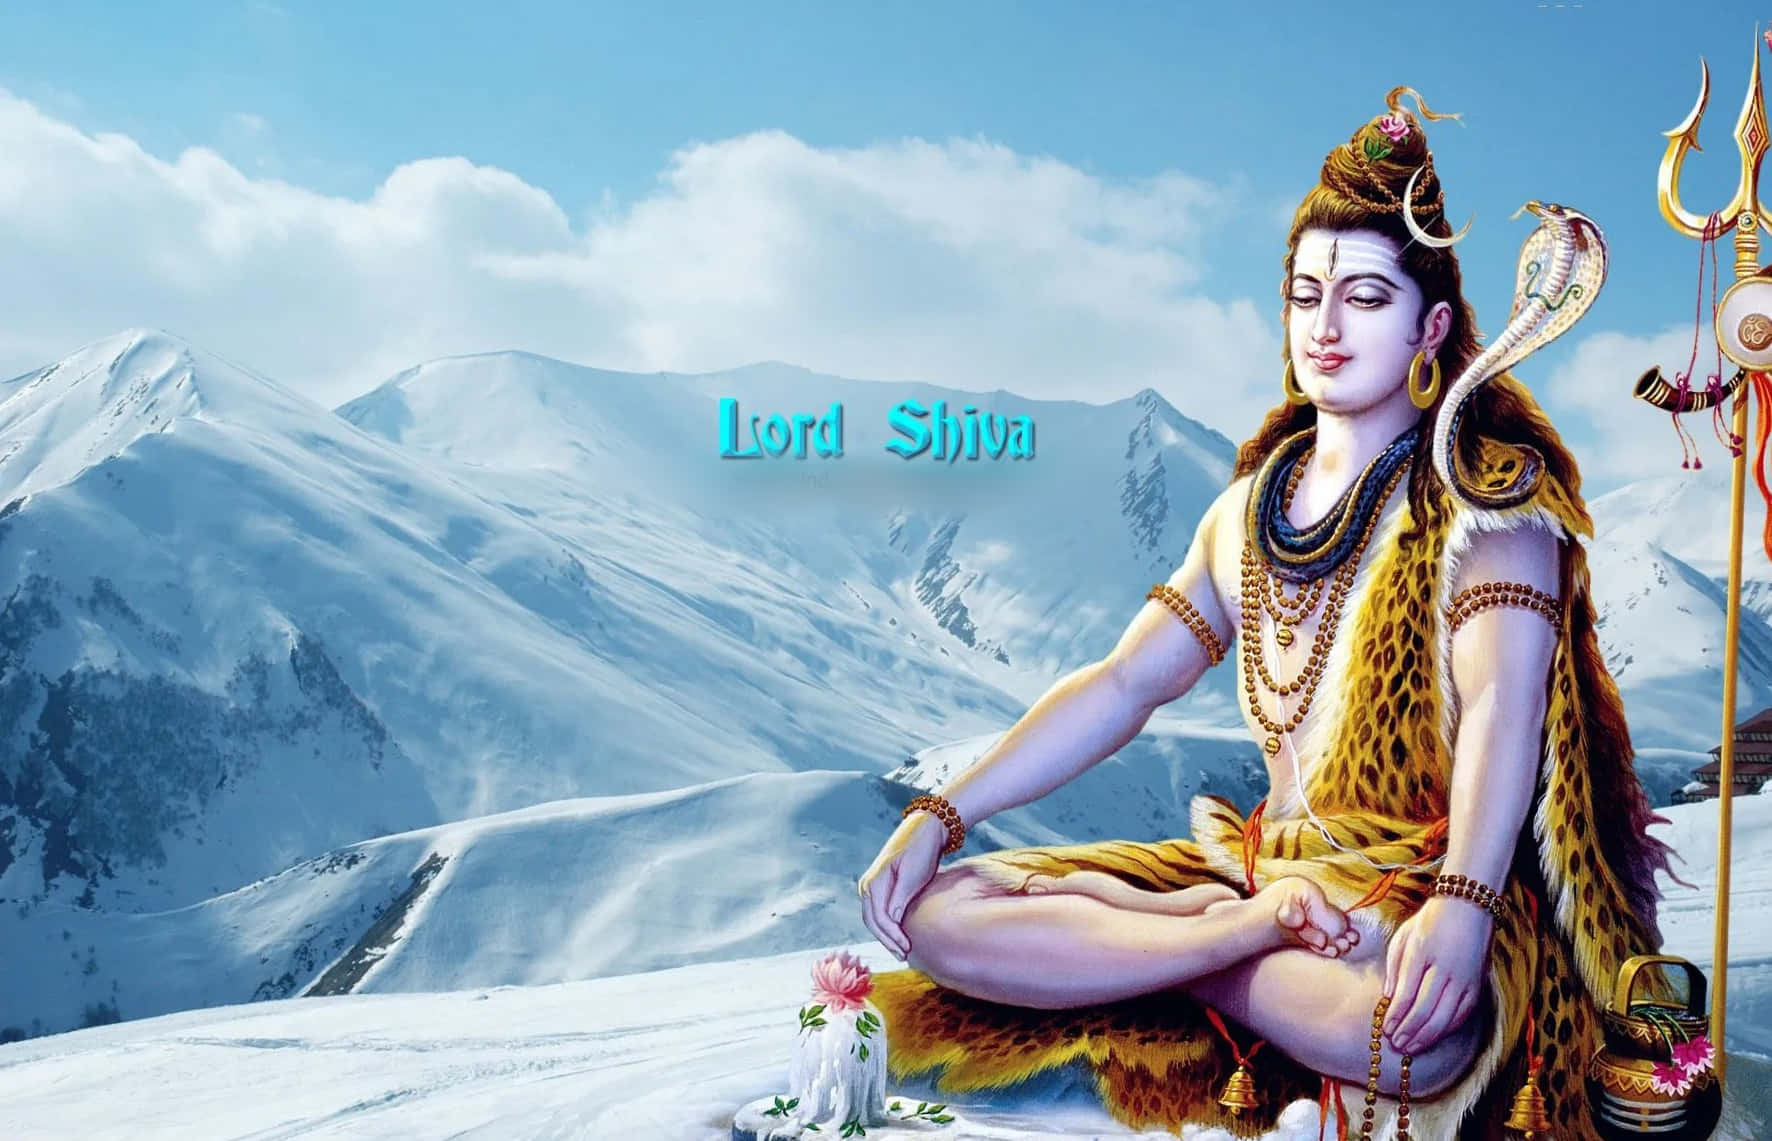 Lord Shiva Sitting On Top Of A Mountain